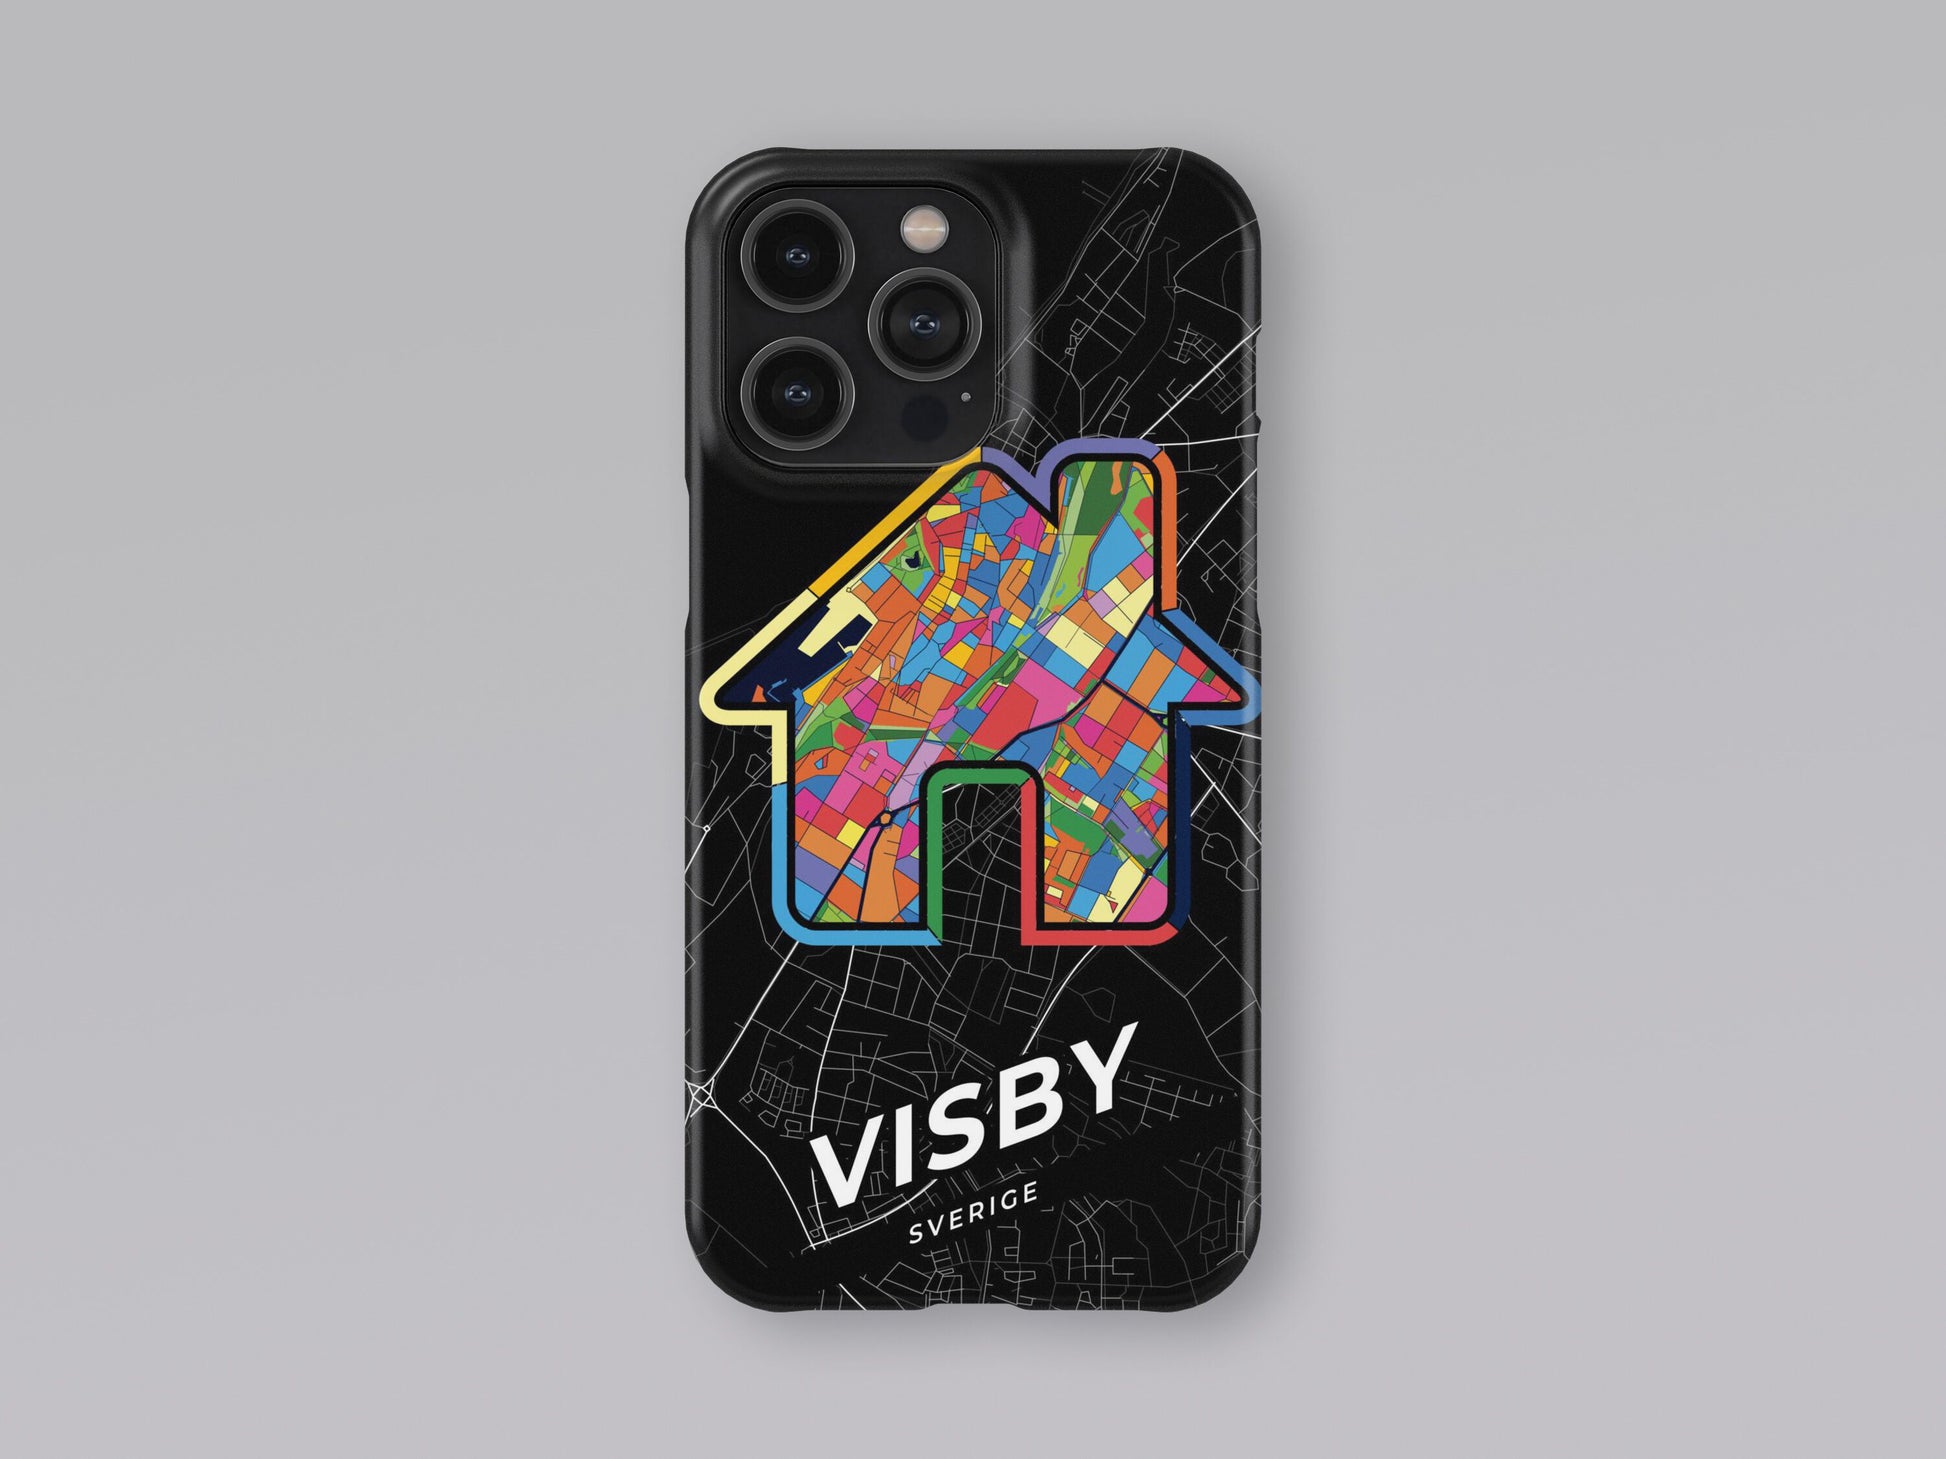 Visby Sweden slim phone case with colorful icon 3